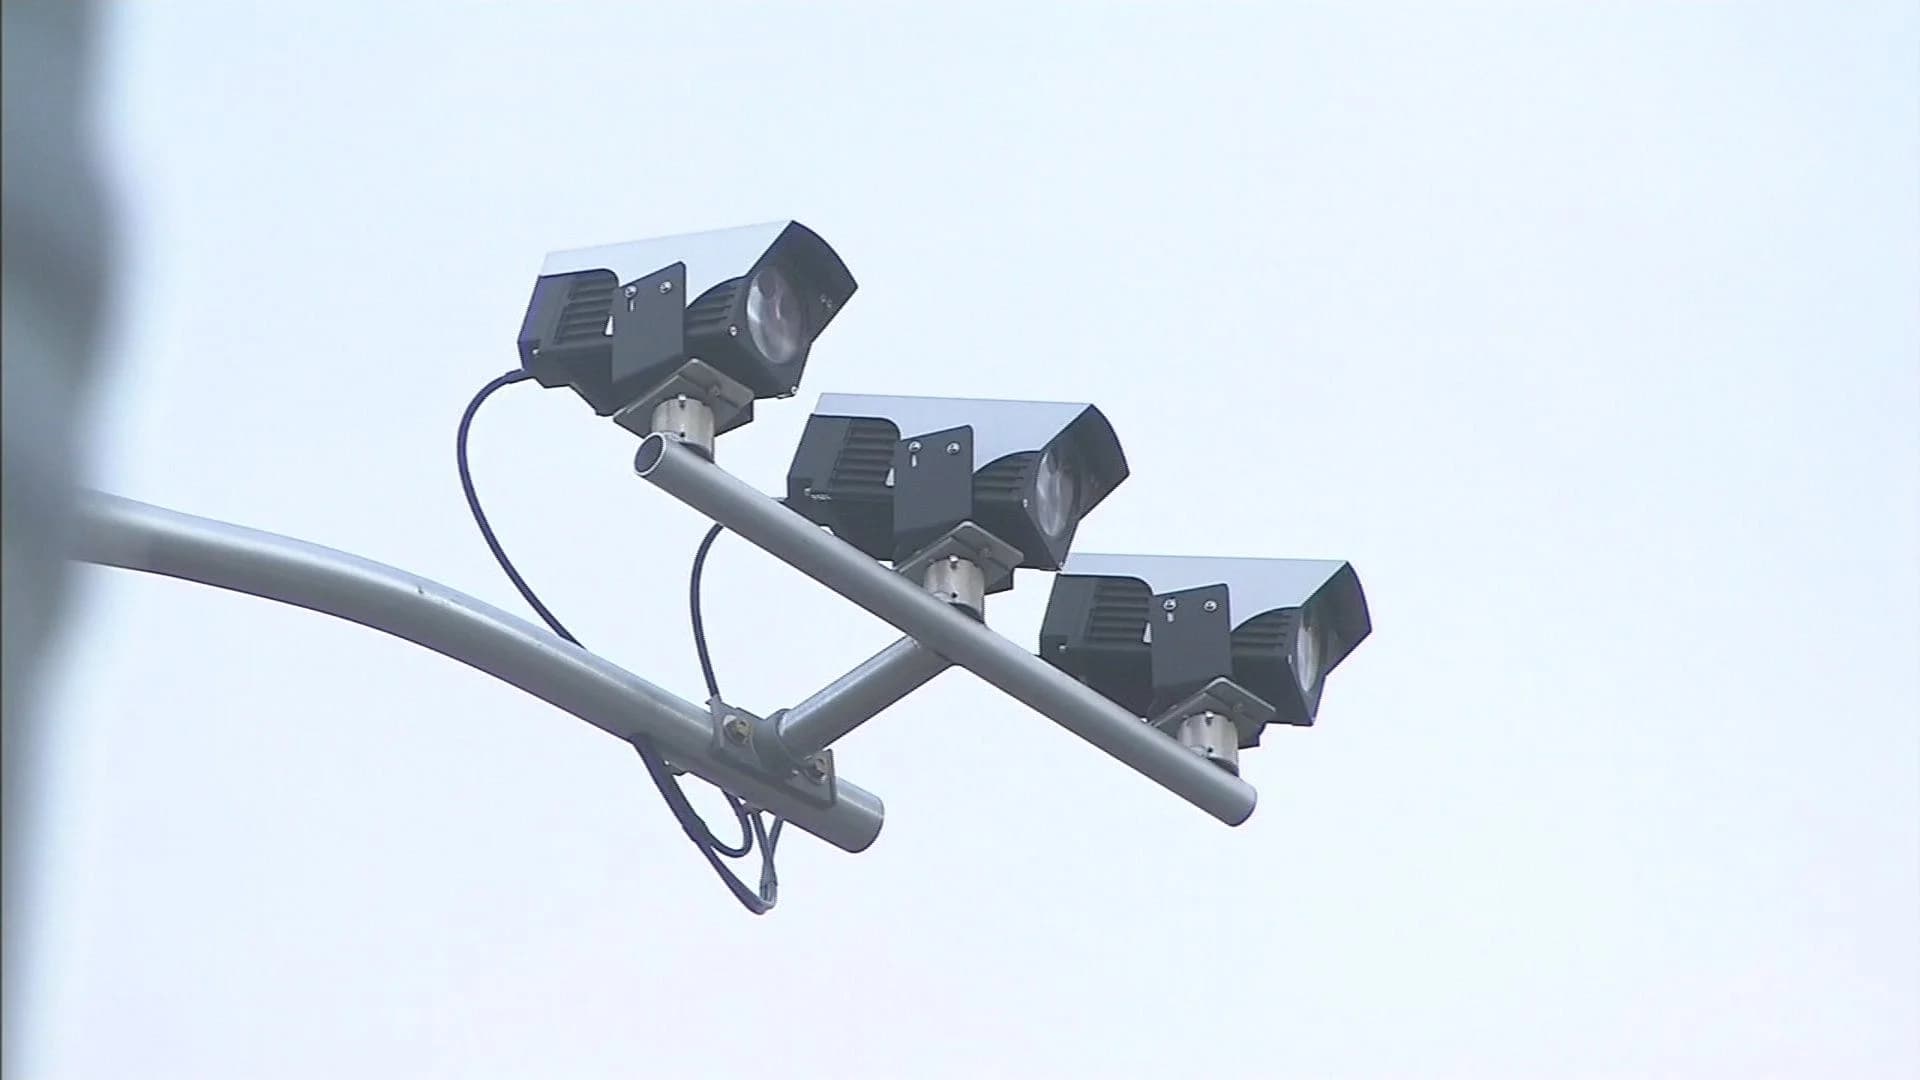 Suffolk hopes to expand license plate readers to combat gangs